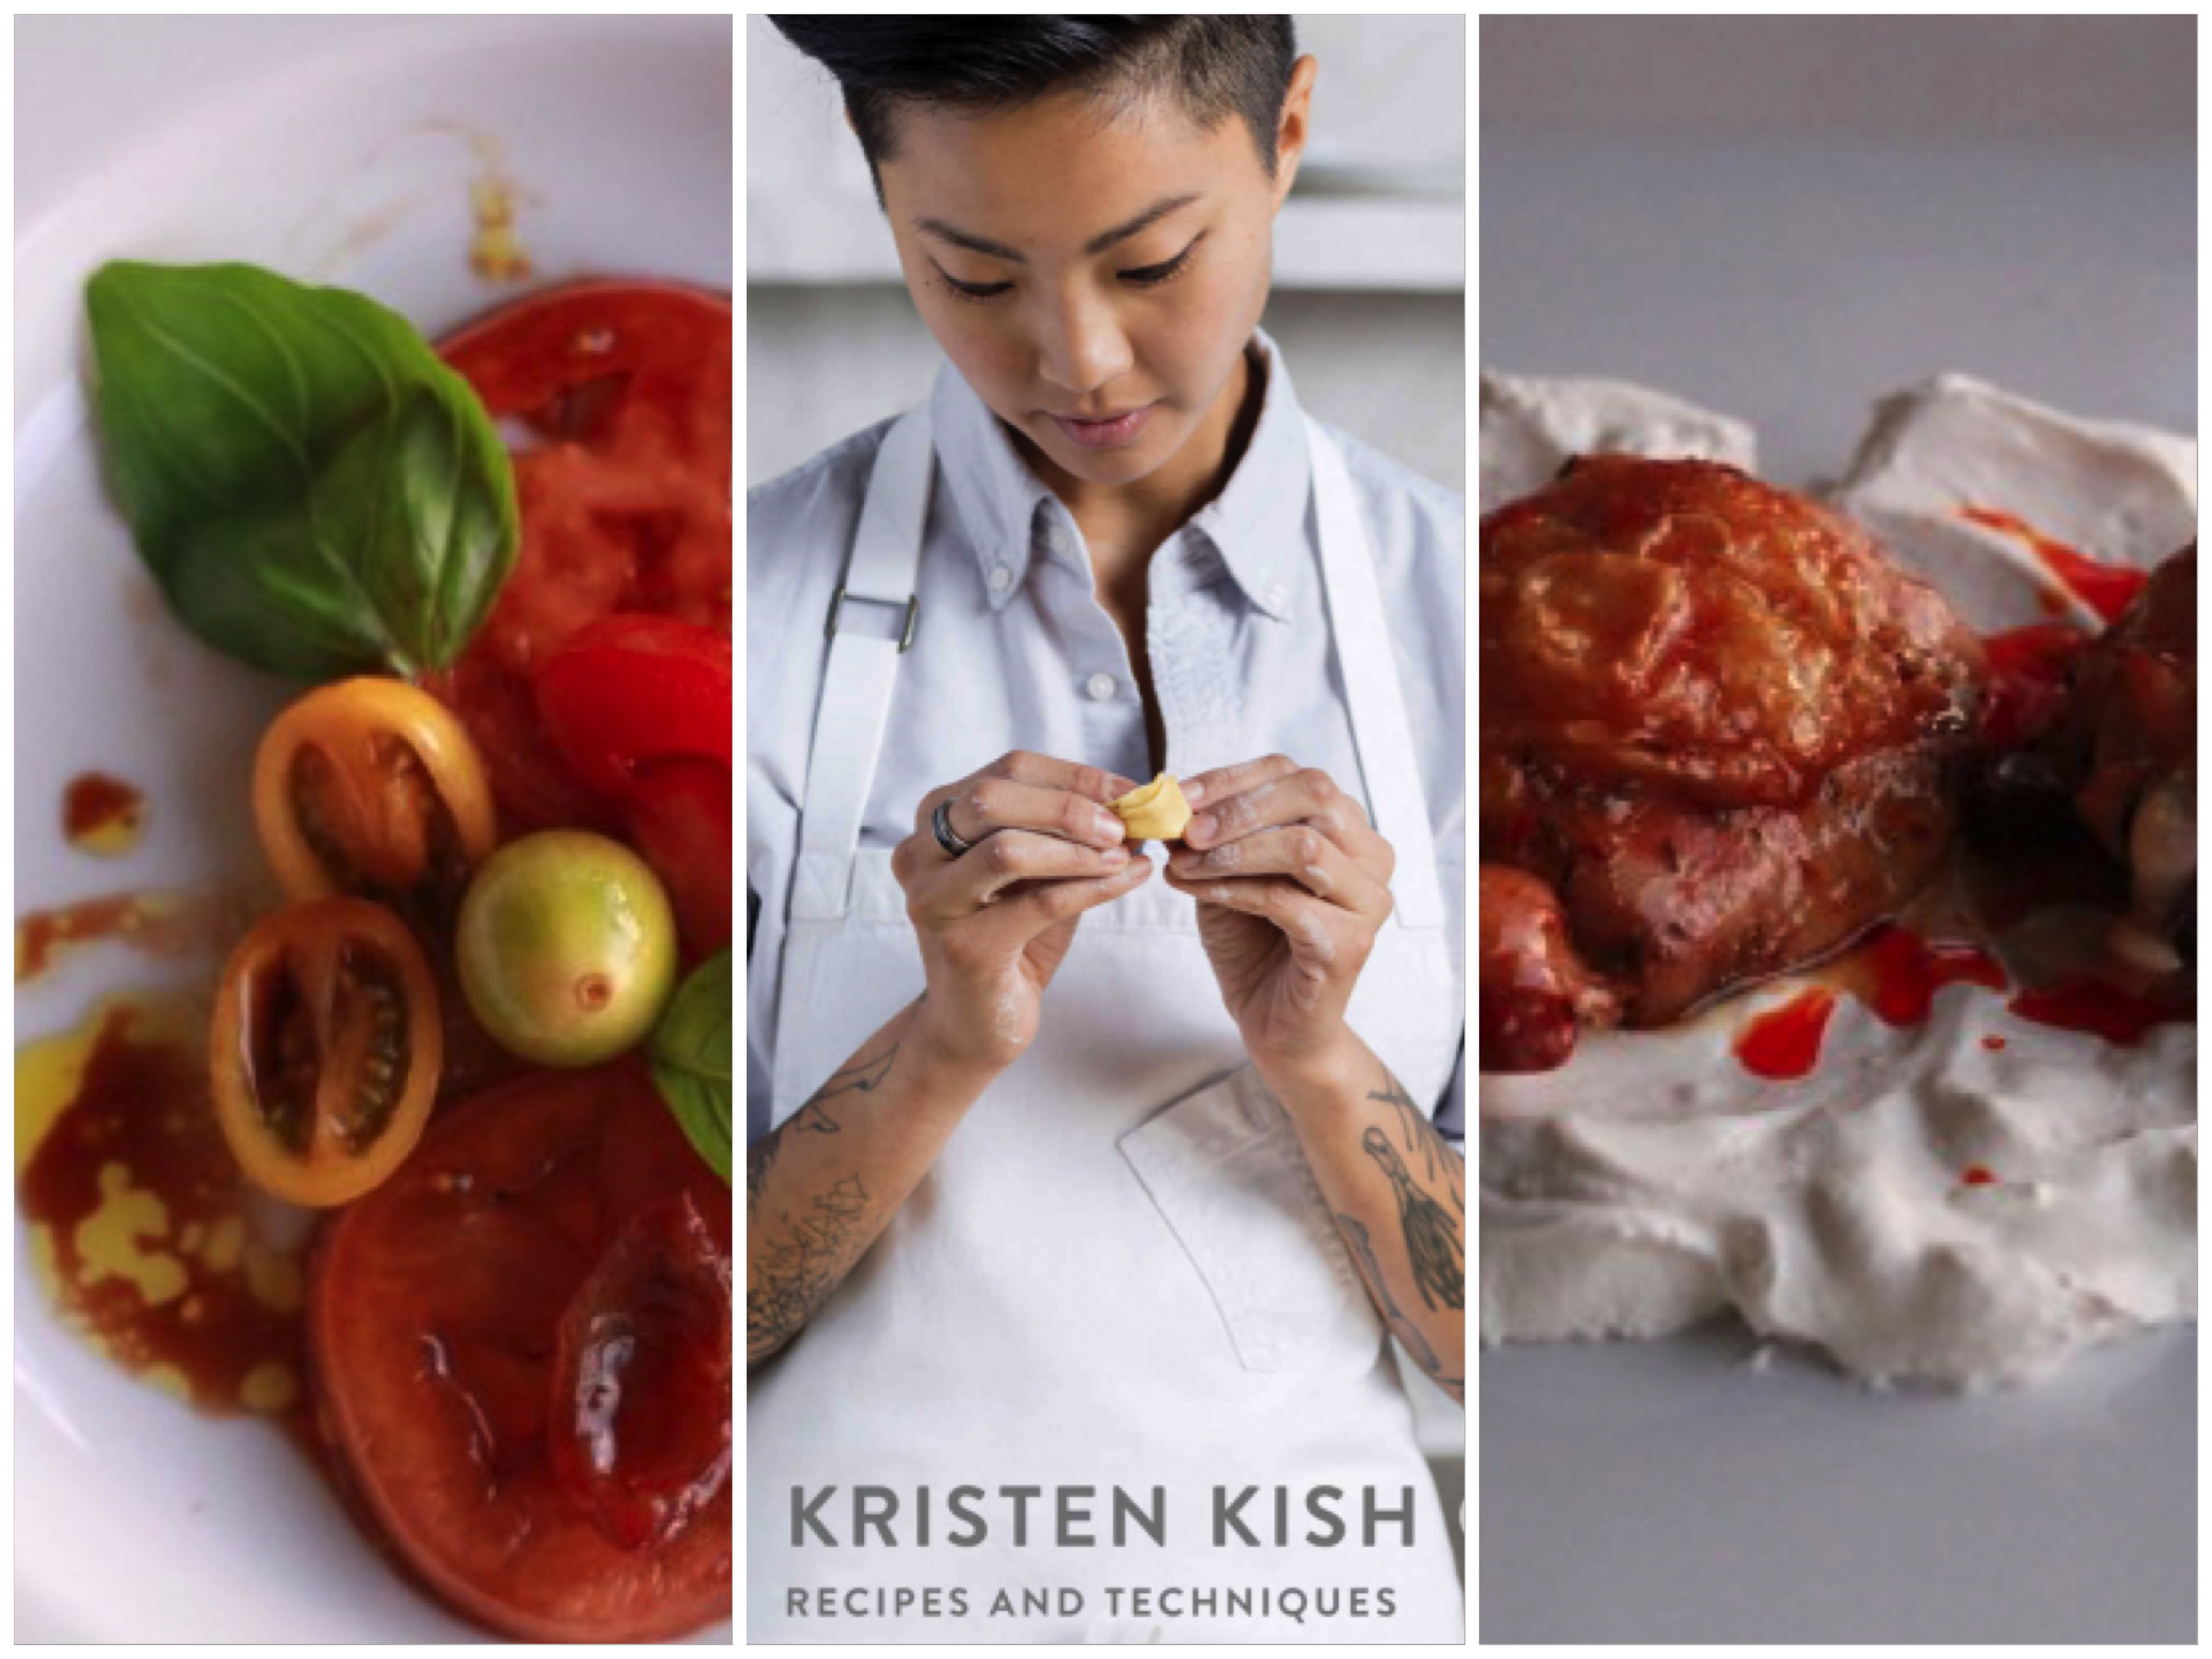 Kristen Kish's New Cookbook Helped Me Wine and Dine My Valentine and So